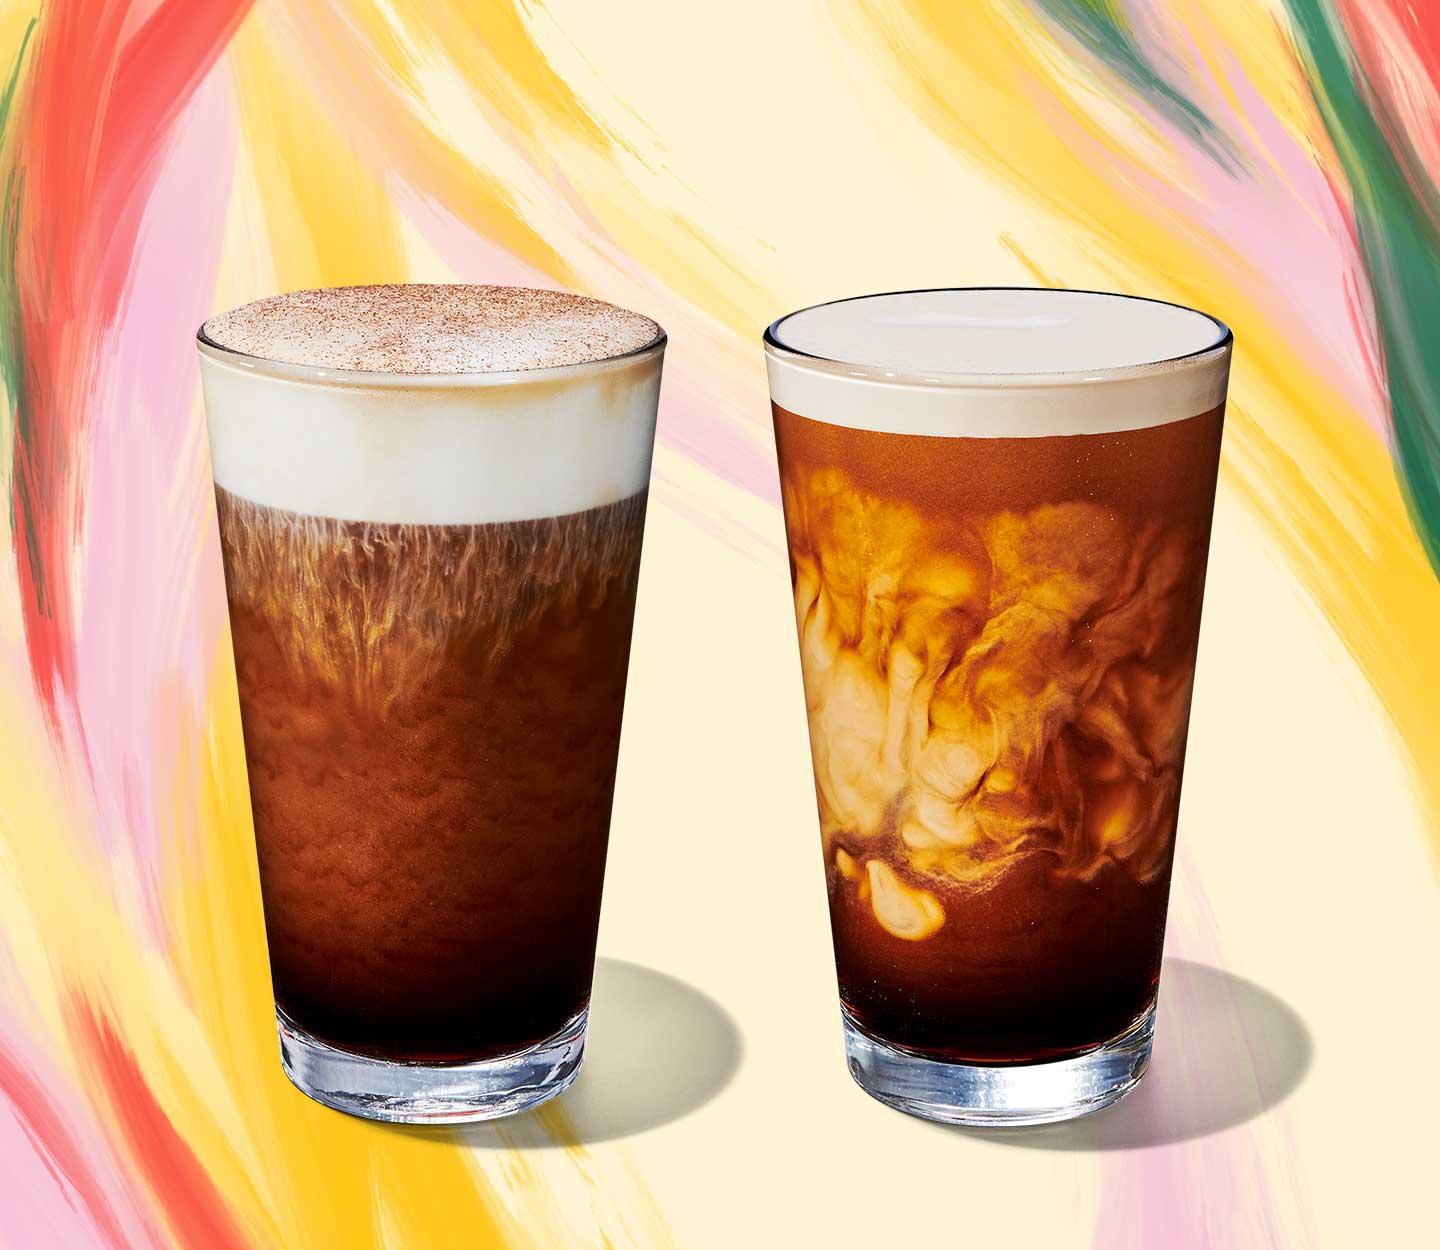 Cold coffee drink with foam topping next to a cold coffee drink with swirls of cream in tall glasses.